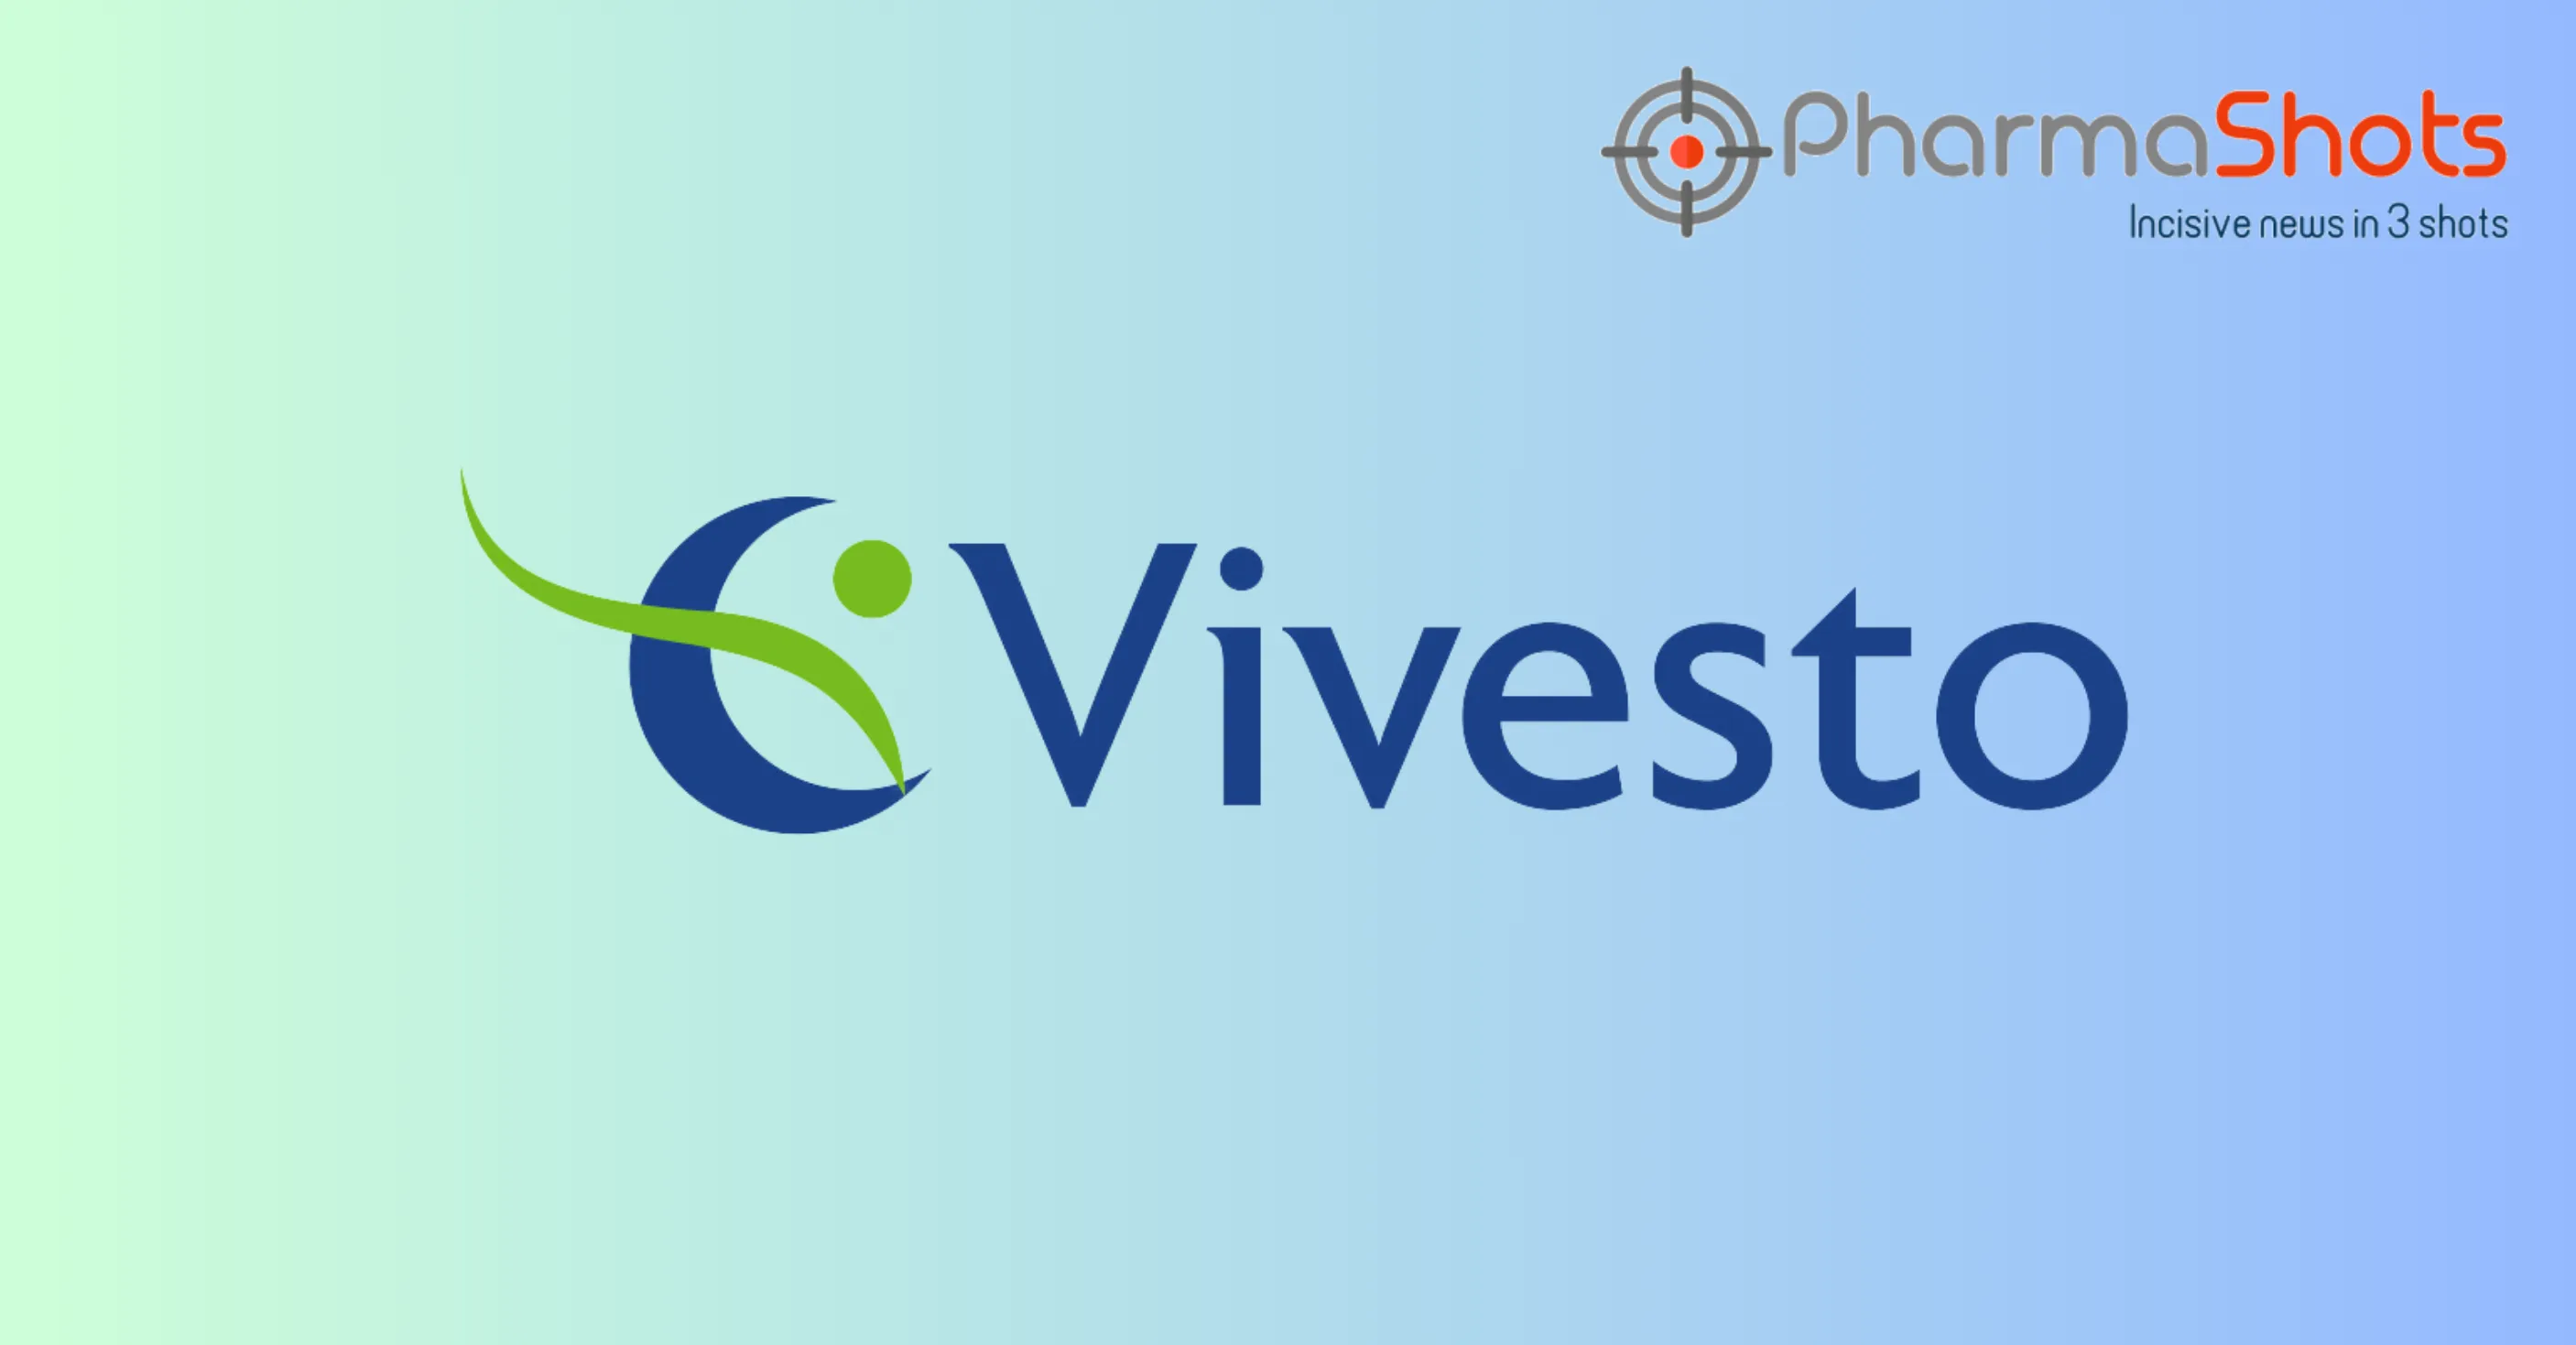 Vivesto Reports Approval of the US Clinical Paccal Vet Study in Dogs with Splenic Hemangiosarcoma